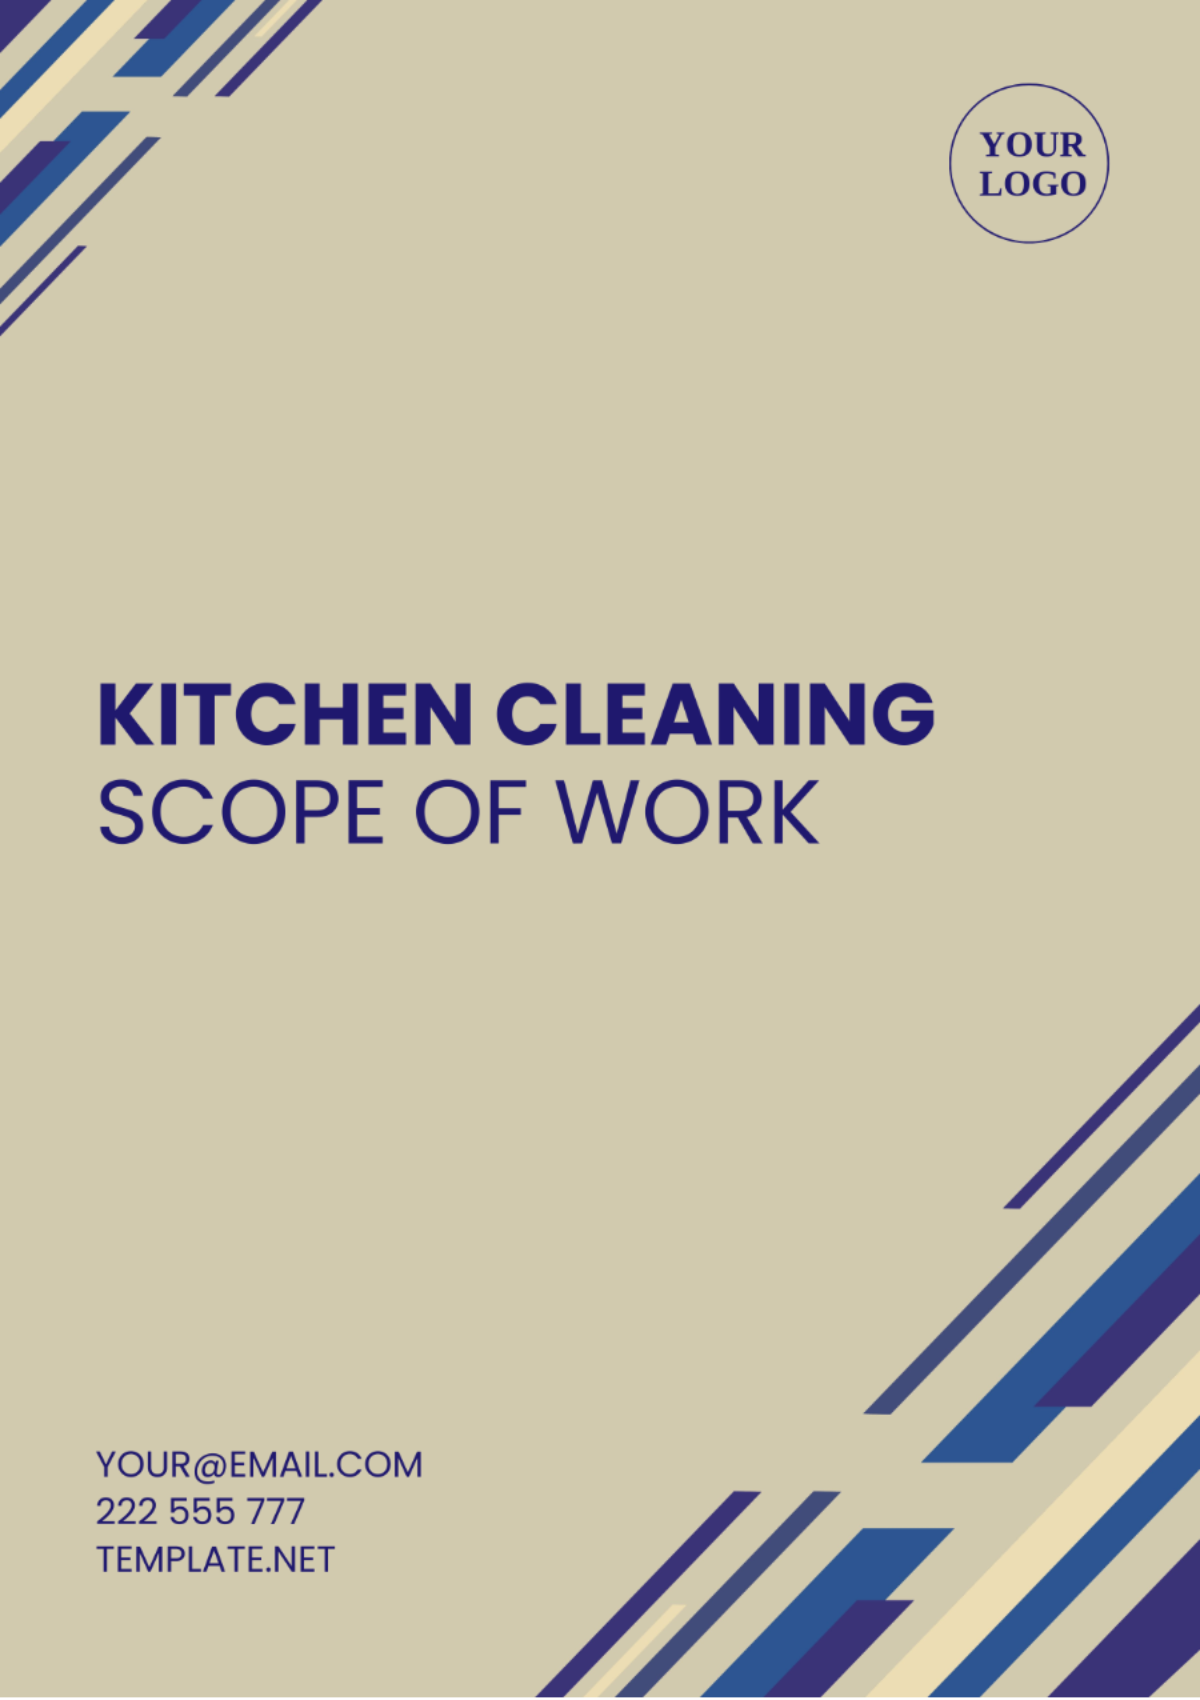 Free Kitchen Cleaning Scope of Work Template